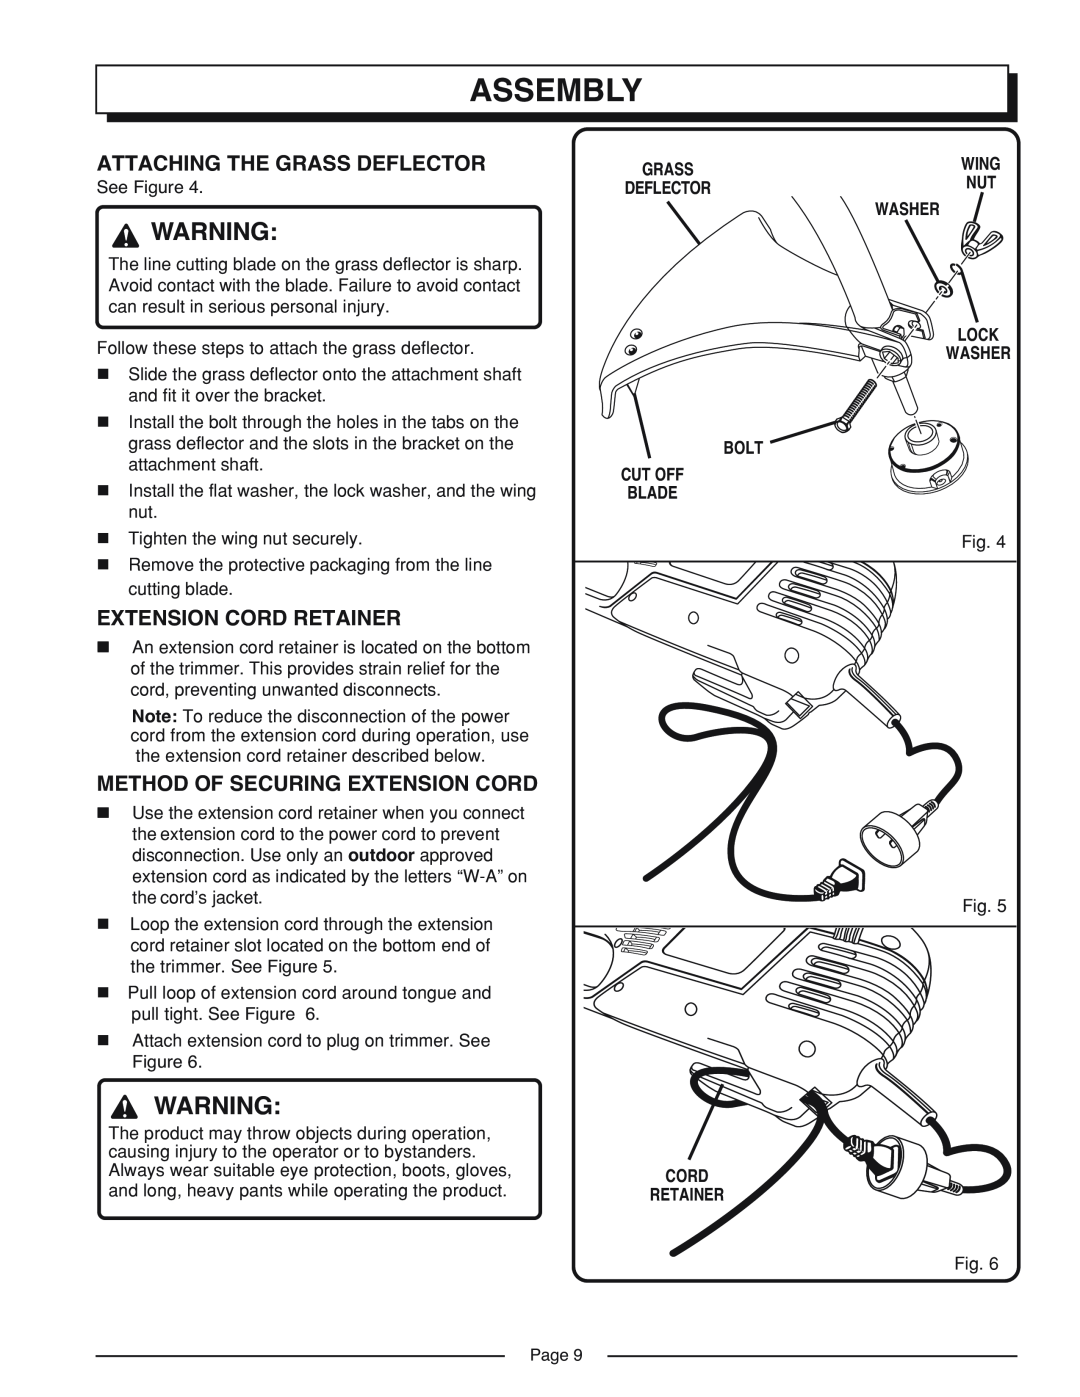 Homelite UT41002A Attaching The Grass Deflector, Extension Cord Retainer, Method Of Securing Extension Cord, Assembly 